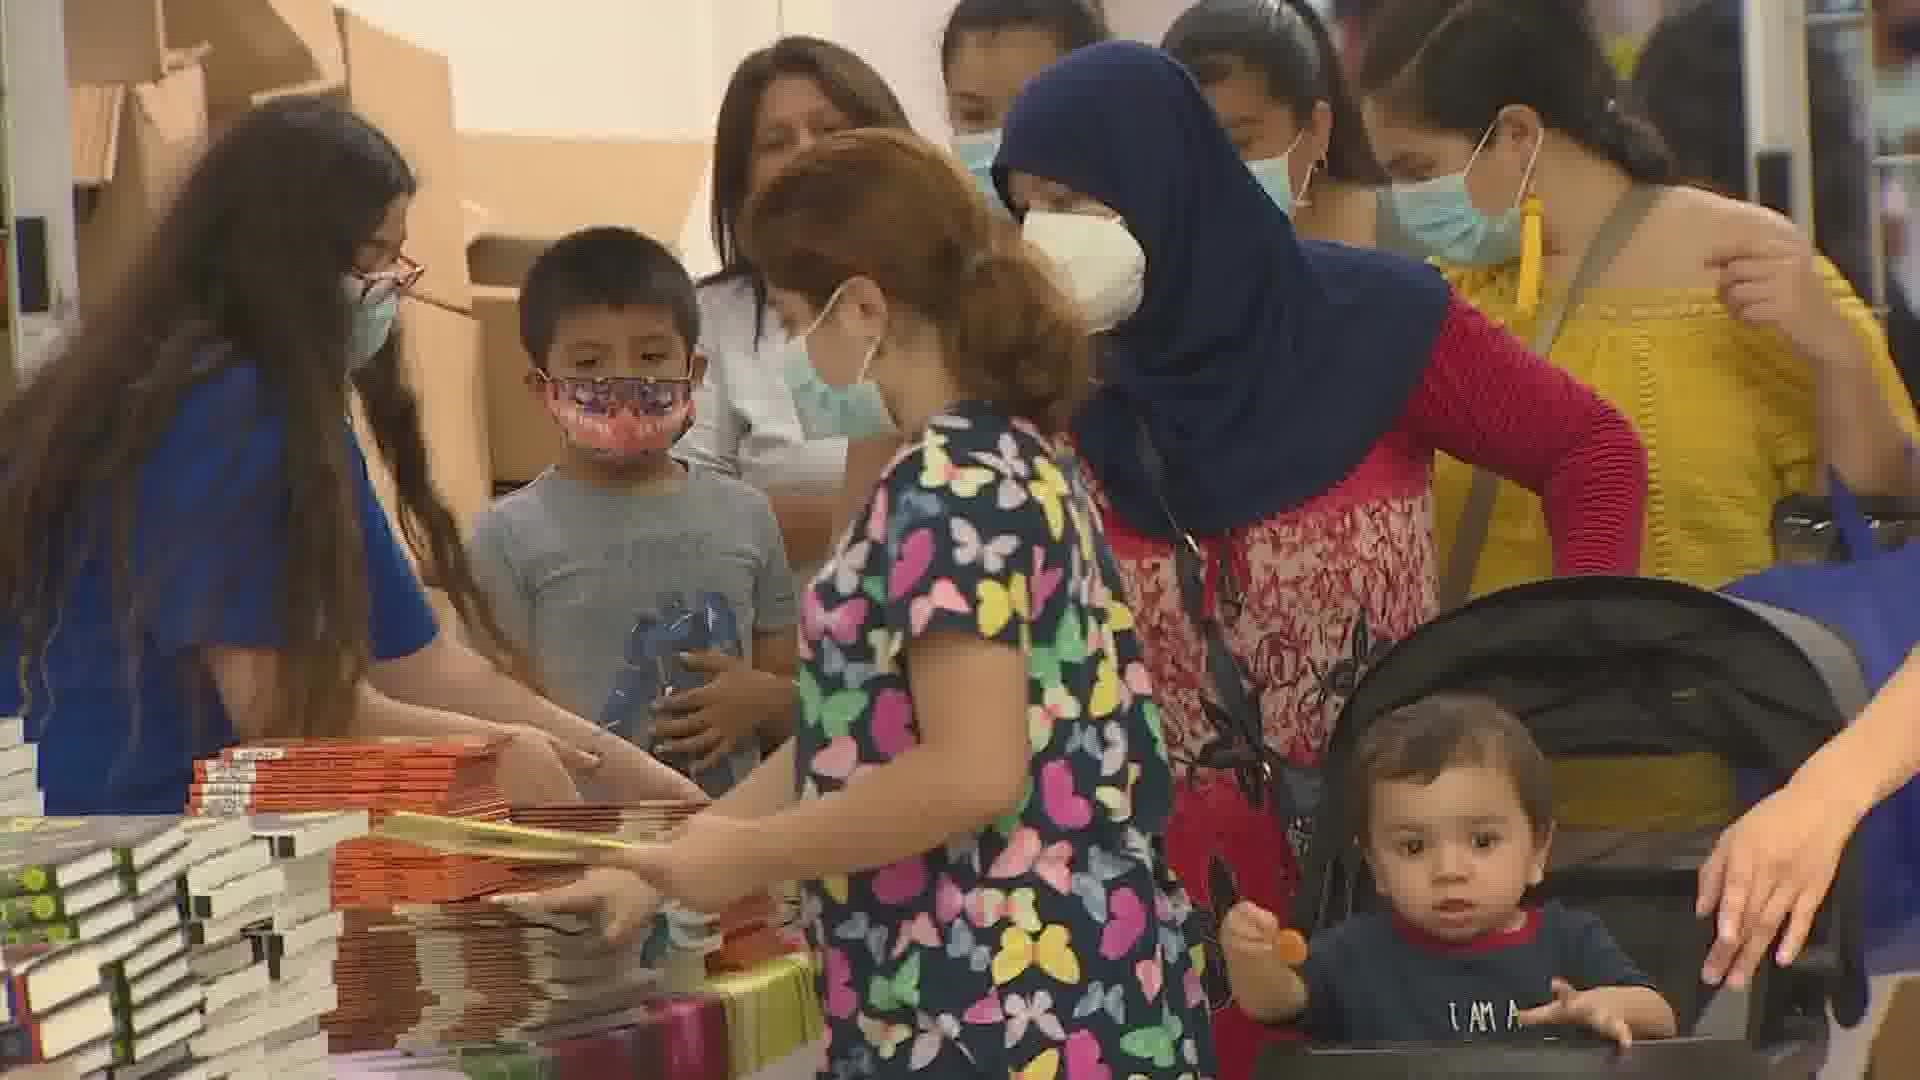 Thousands of people turned out to PlazAmericas Mall on Saturday for a back-to-schhol supply event.